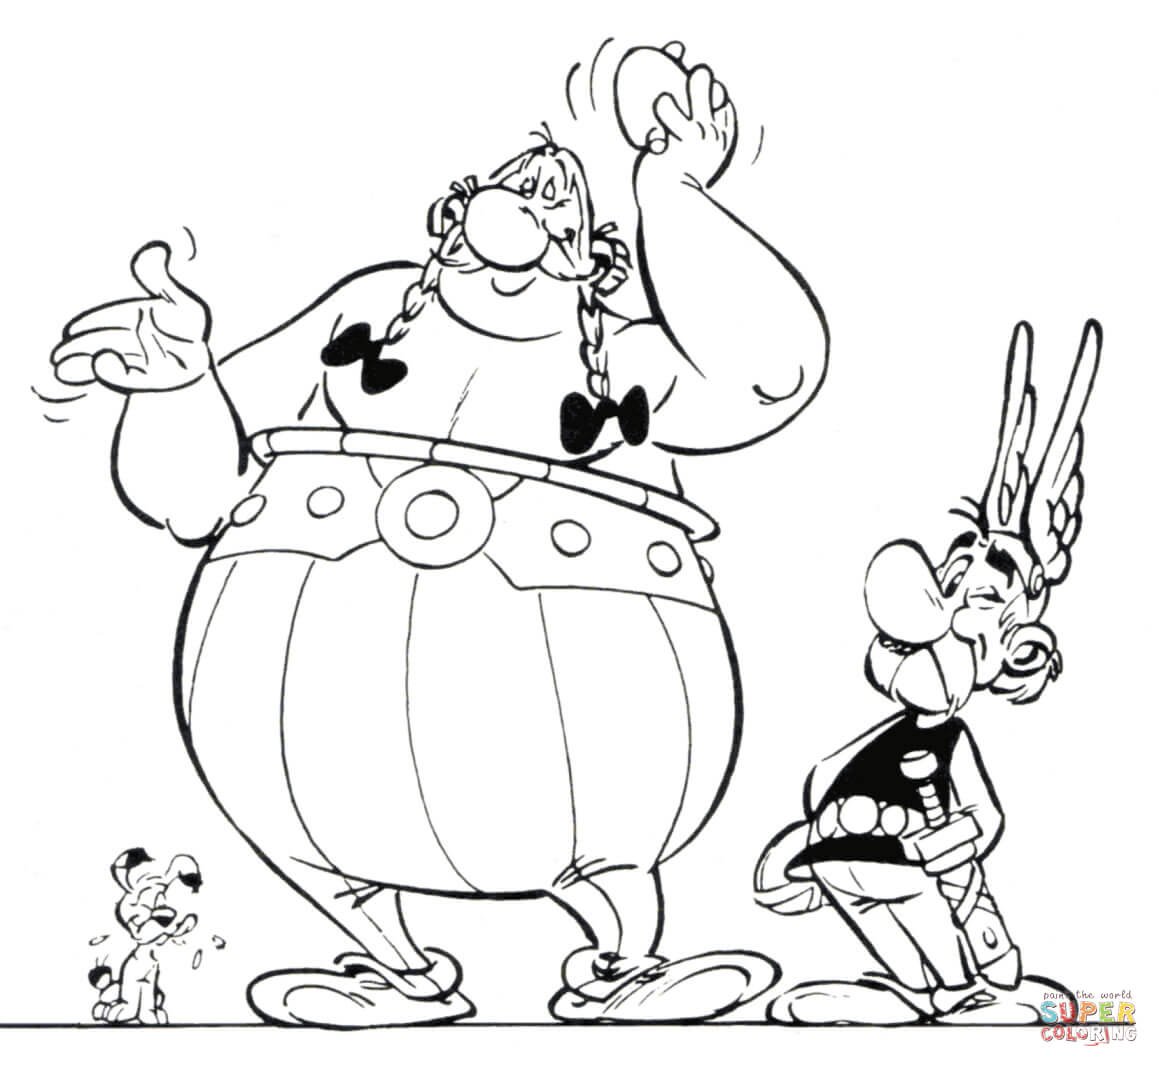 Asterix coloring pages | Free Coloring Pages